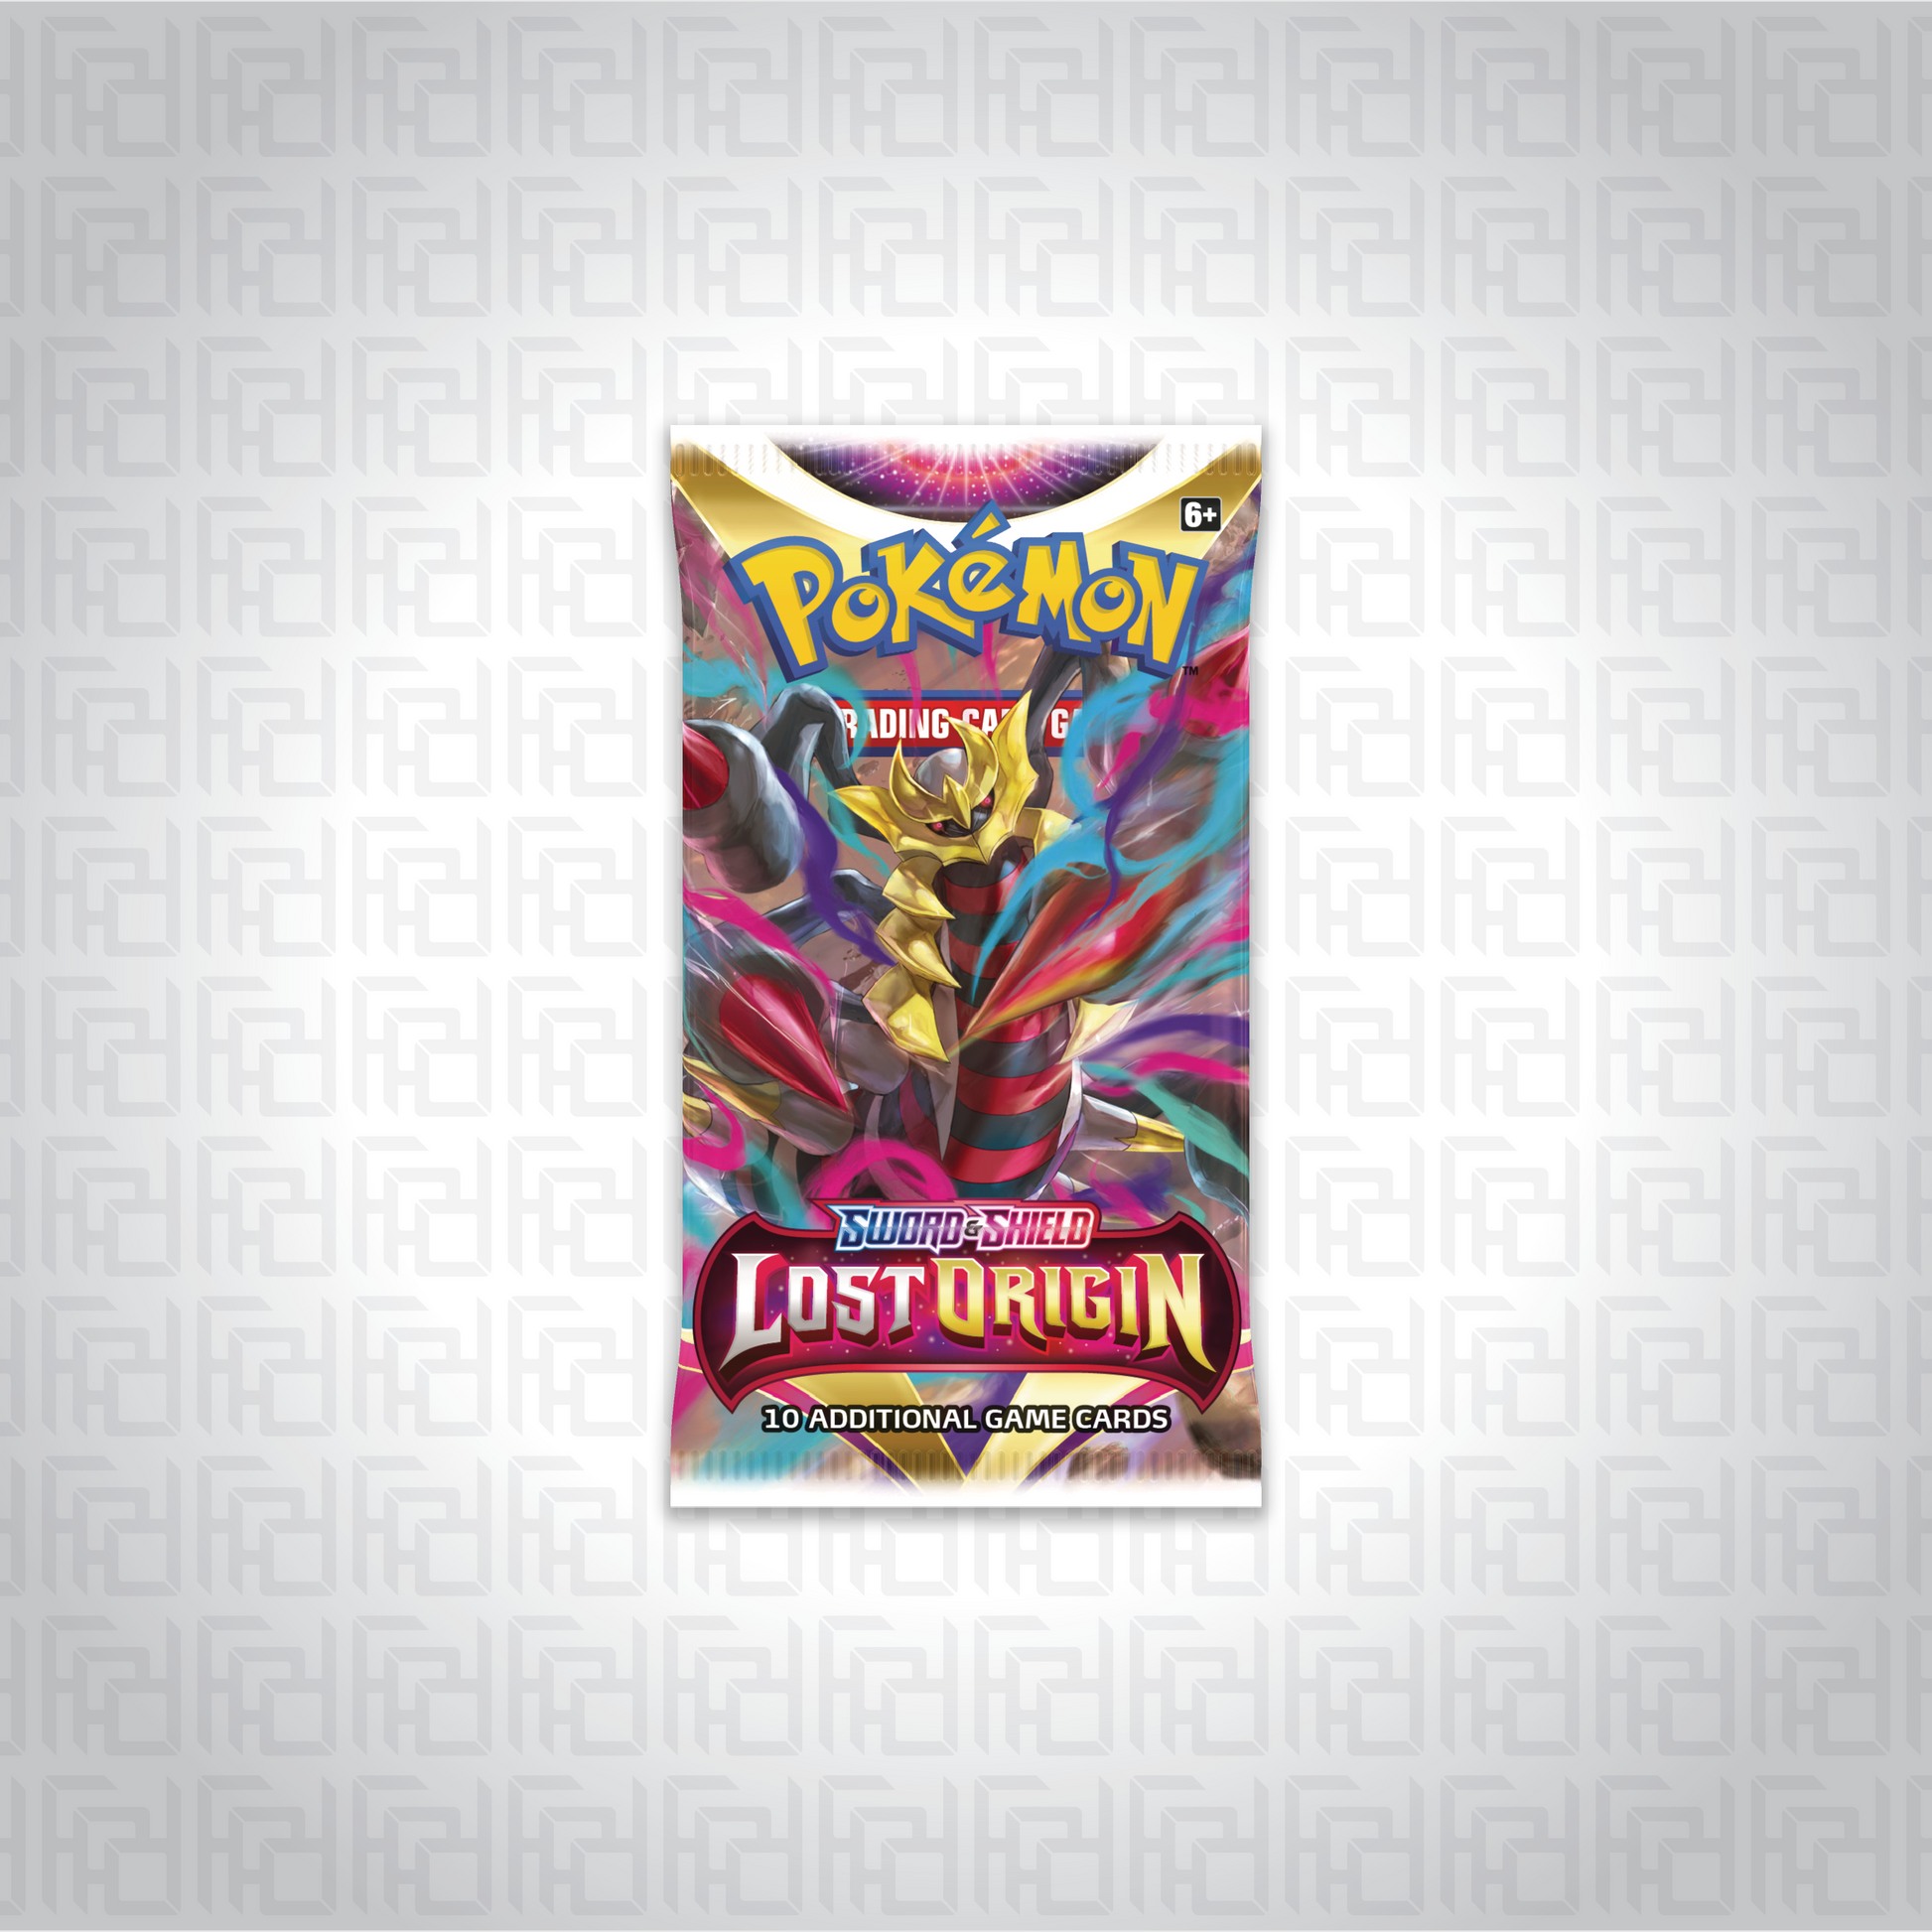 Pokemon Trading Card Game booster pack of Sword & Shield—Lost Origin expansion.